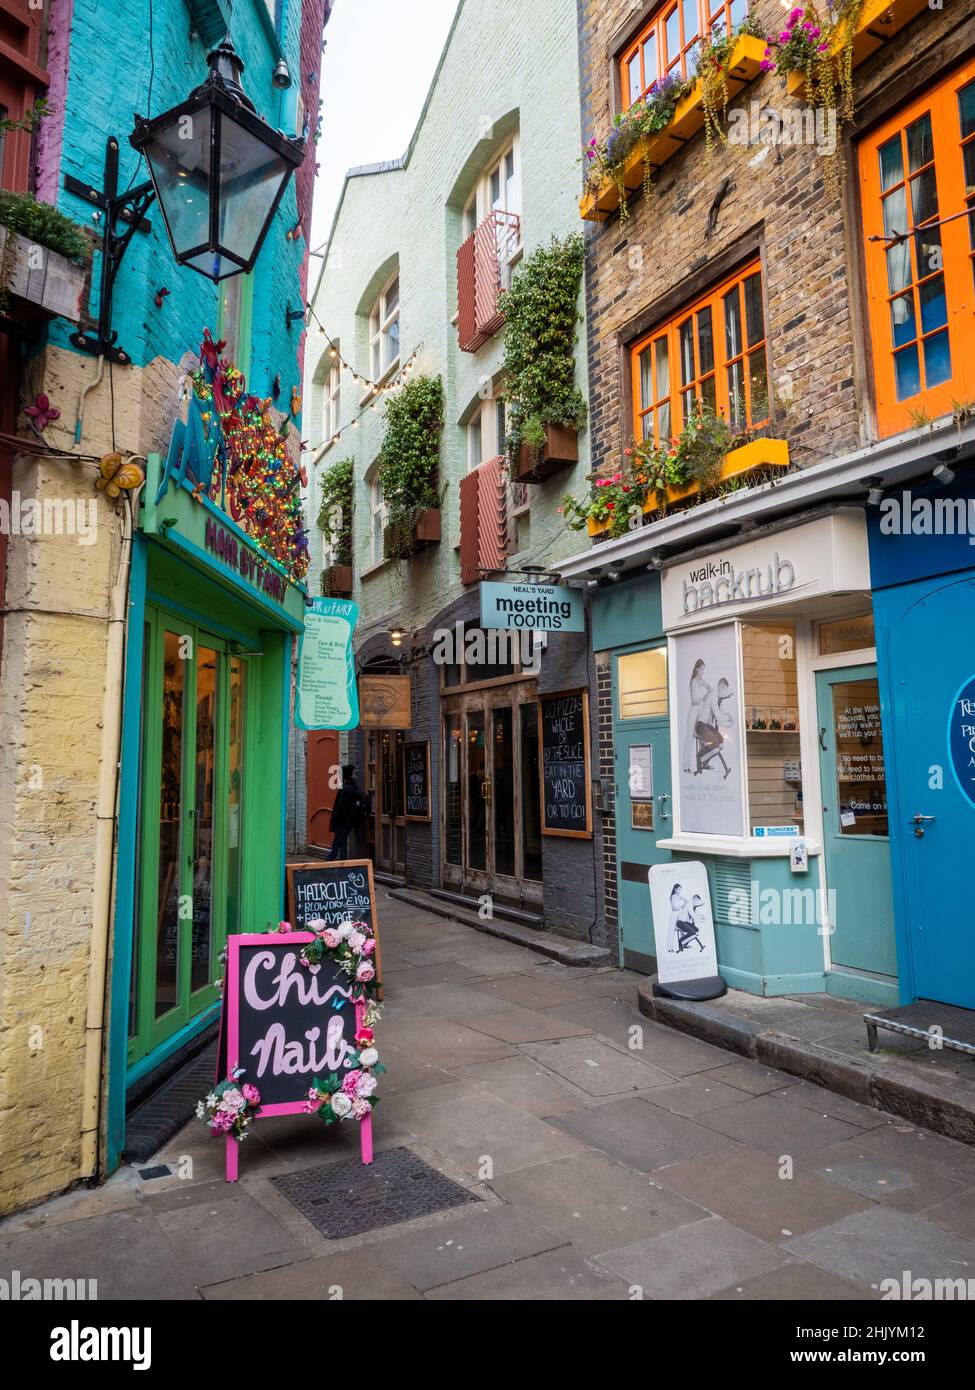 Neal's Yard, Seven Dials, London. The quirky independent shops and narrow  alleys of the central London exclusive shopping district near Covent Garden  Stock Photo - Alamy